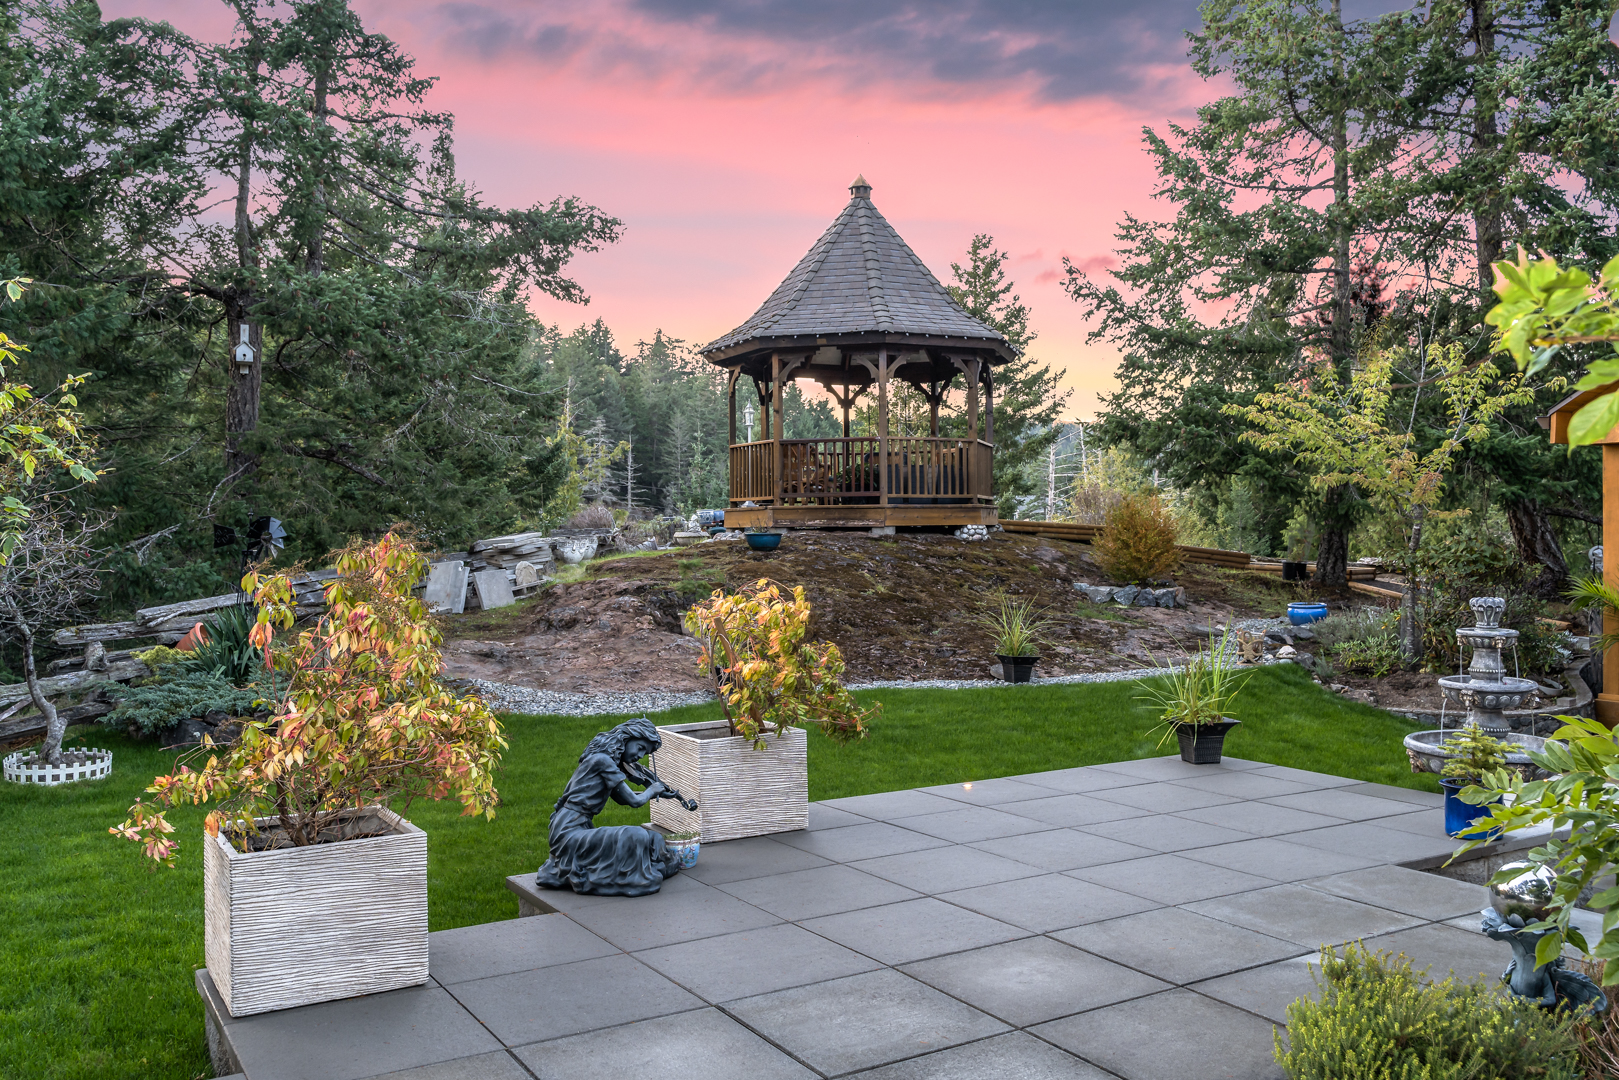 Backyard patio with gazebo perched on top of rock